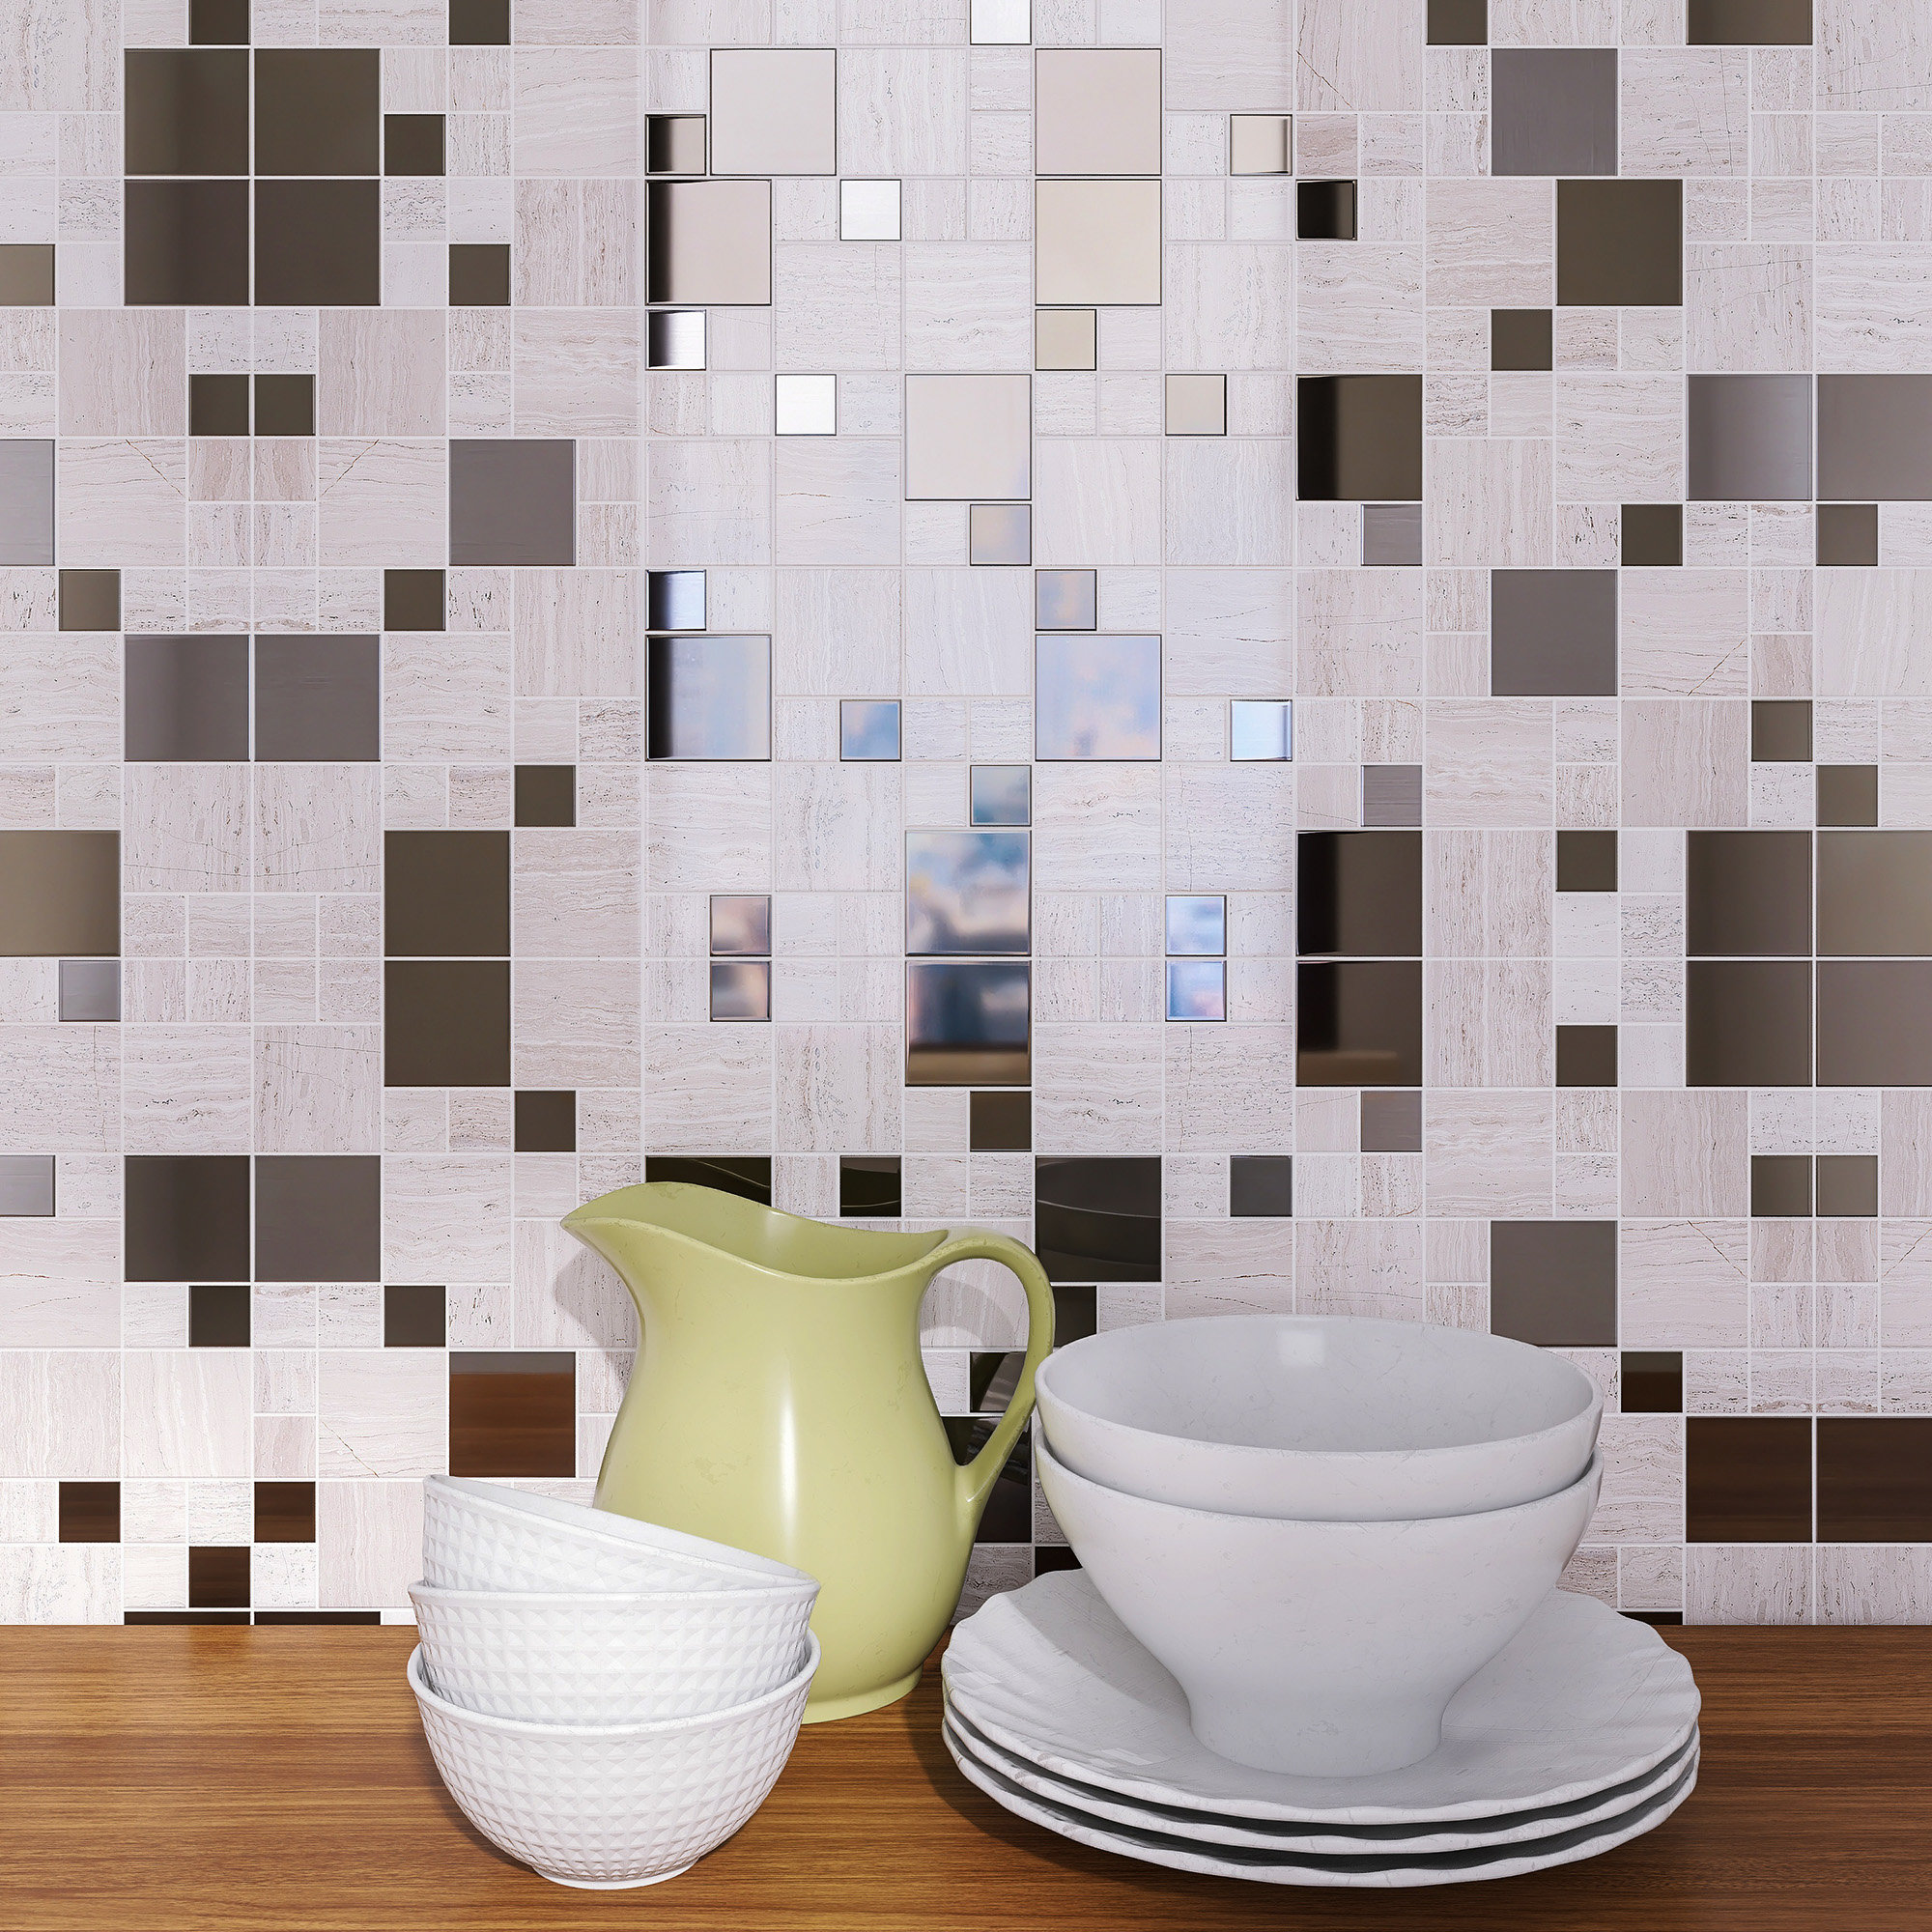 Andova Curvation Specialty 1 x 2 Glass Mosaic Tile